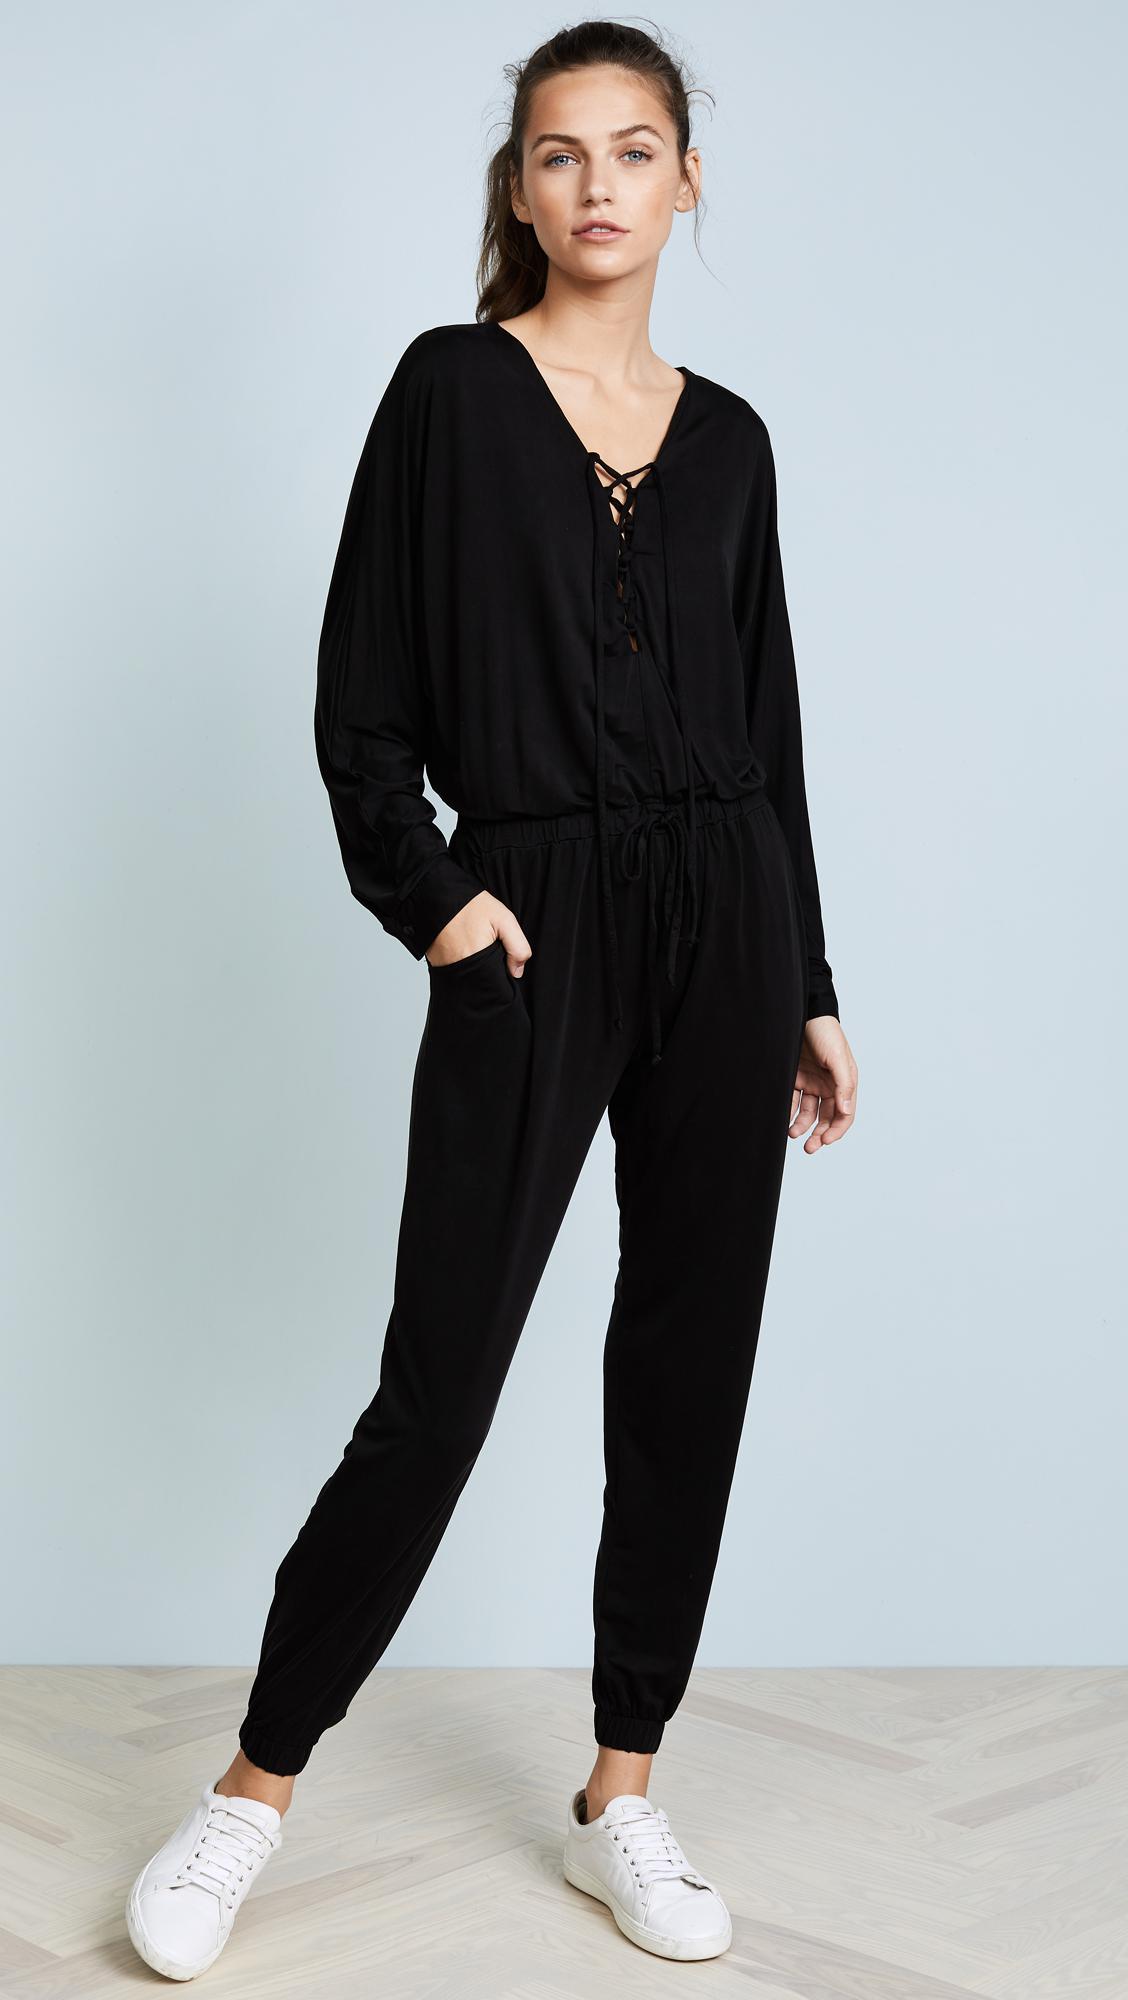 Lyst - Young Fabulous & Broke Yfb Clothing Lenny Jumpsuit in Black